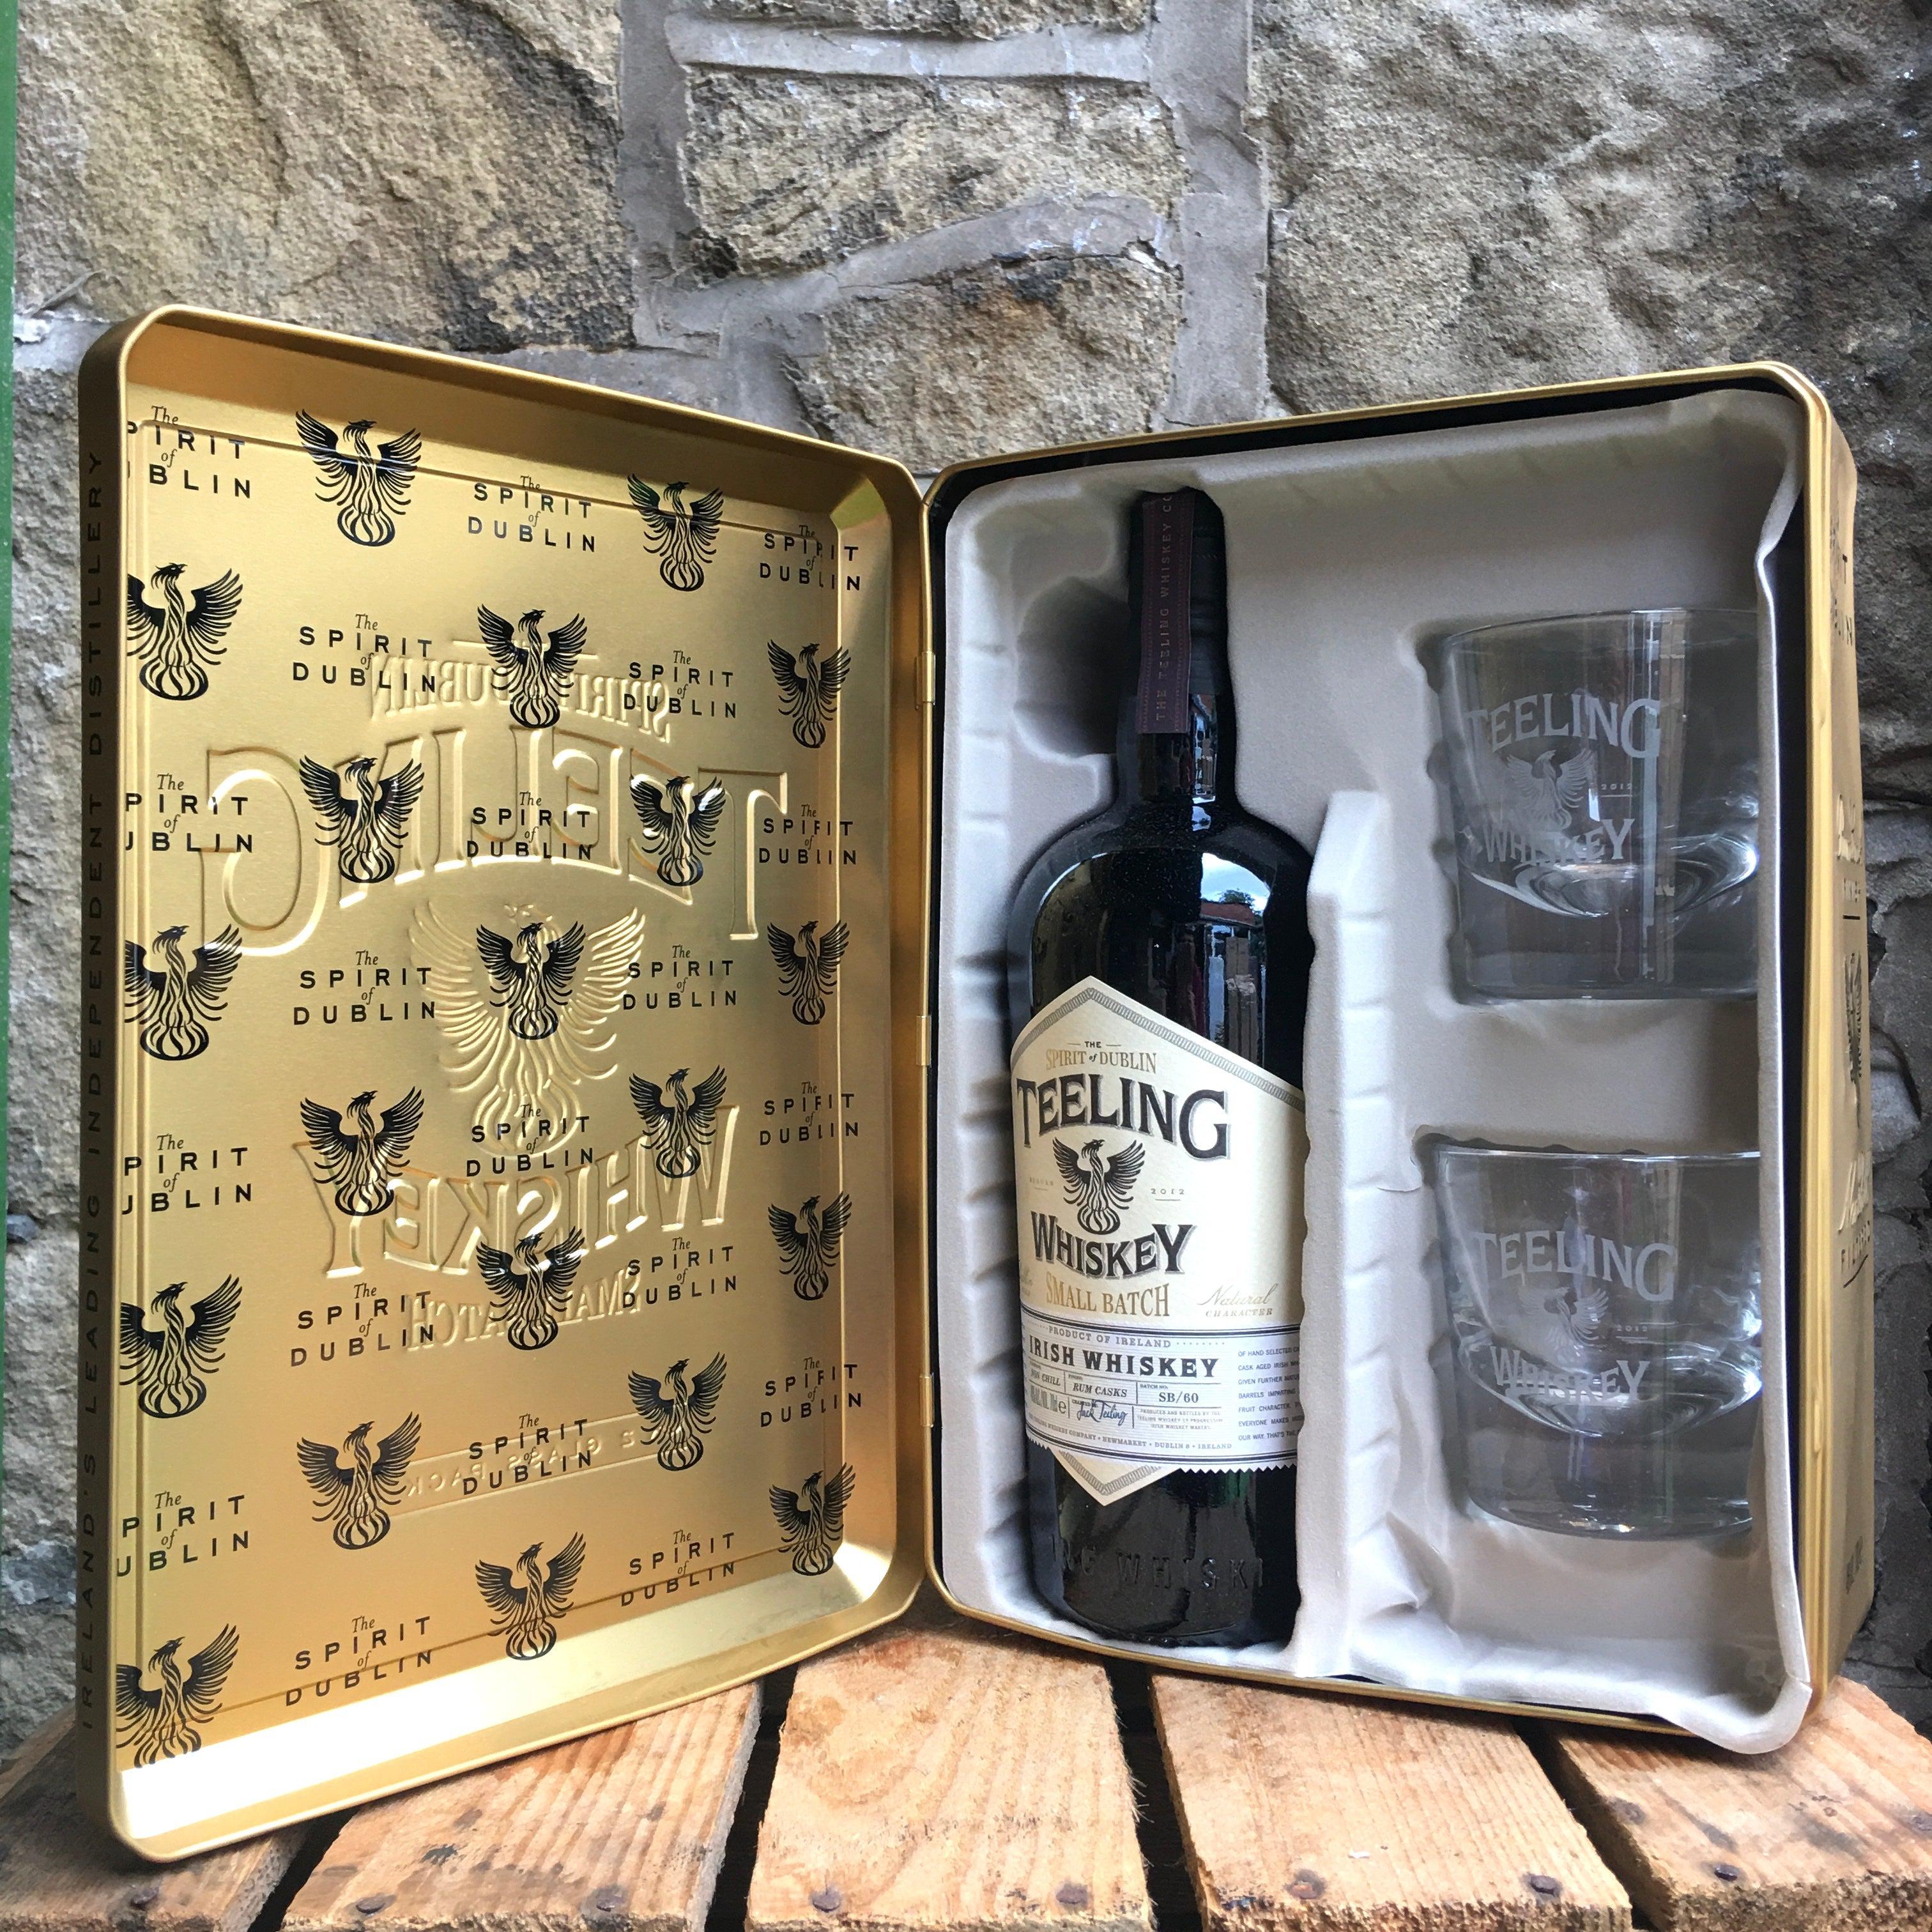 Whiskey Teeling Small Batch - Metal case 2 glasses - 46%